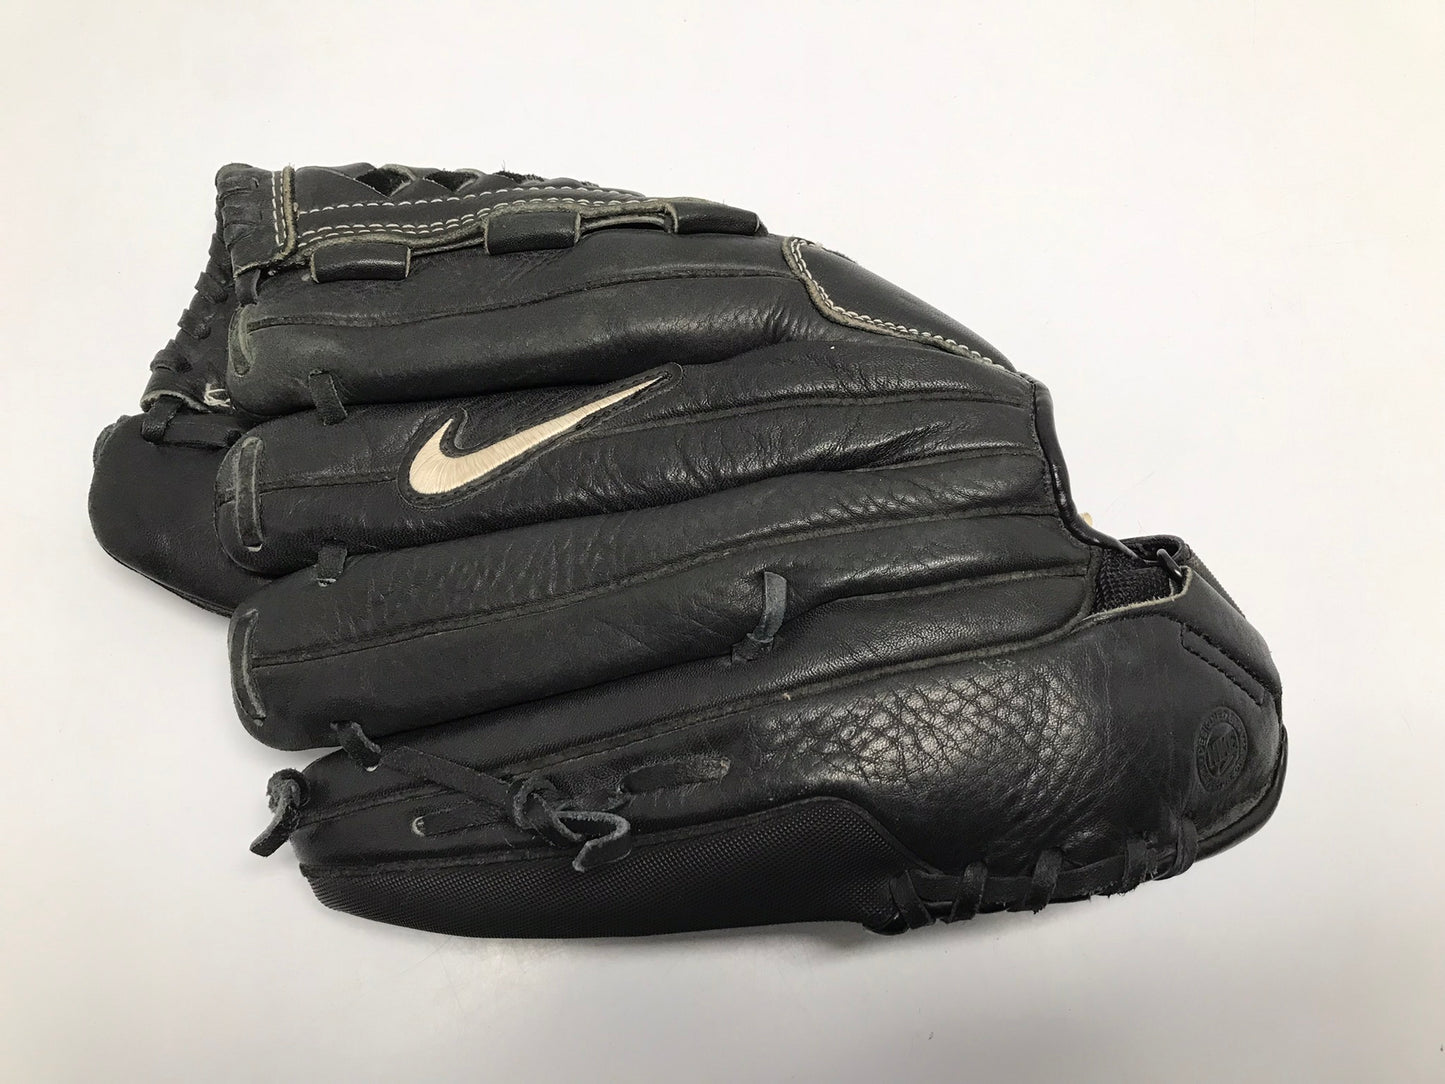 Baseball Glove Men's Size 13 inch Nike Supple Black Leather Fits On Left Hand Outstanding